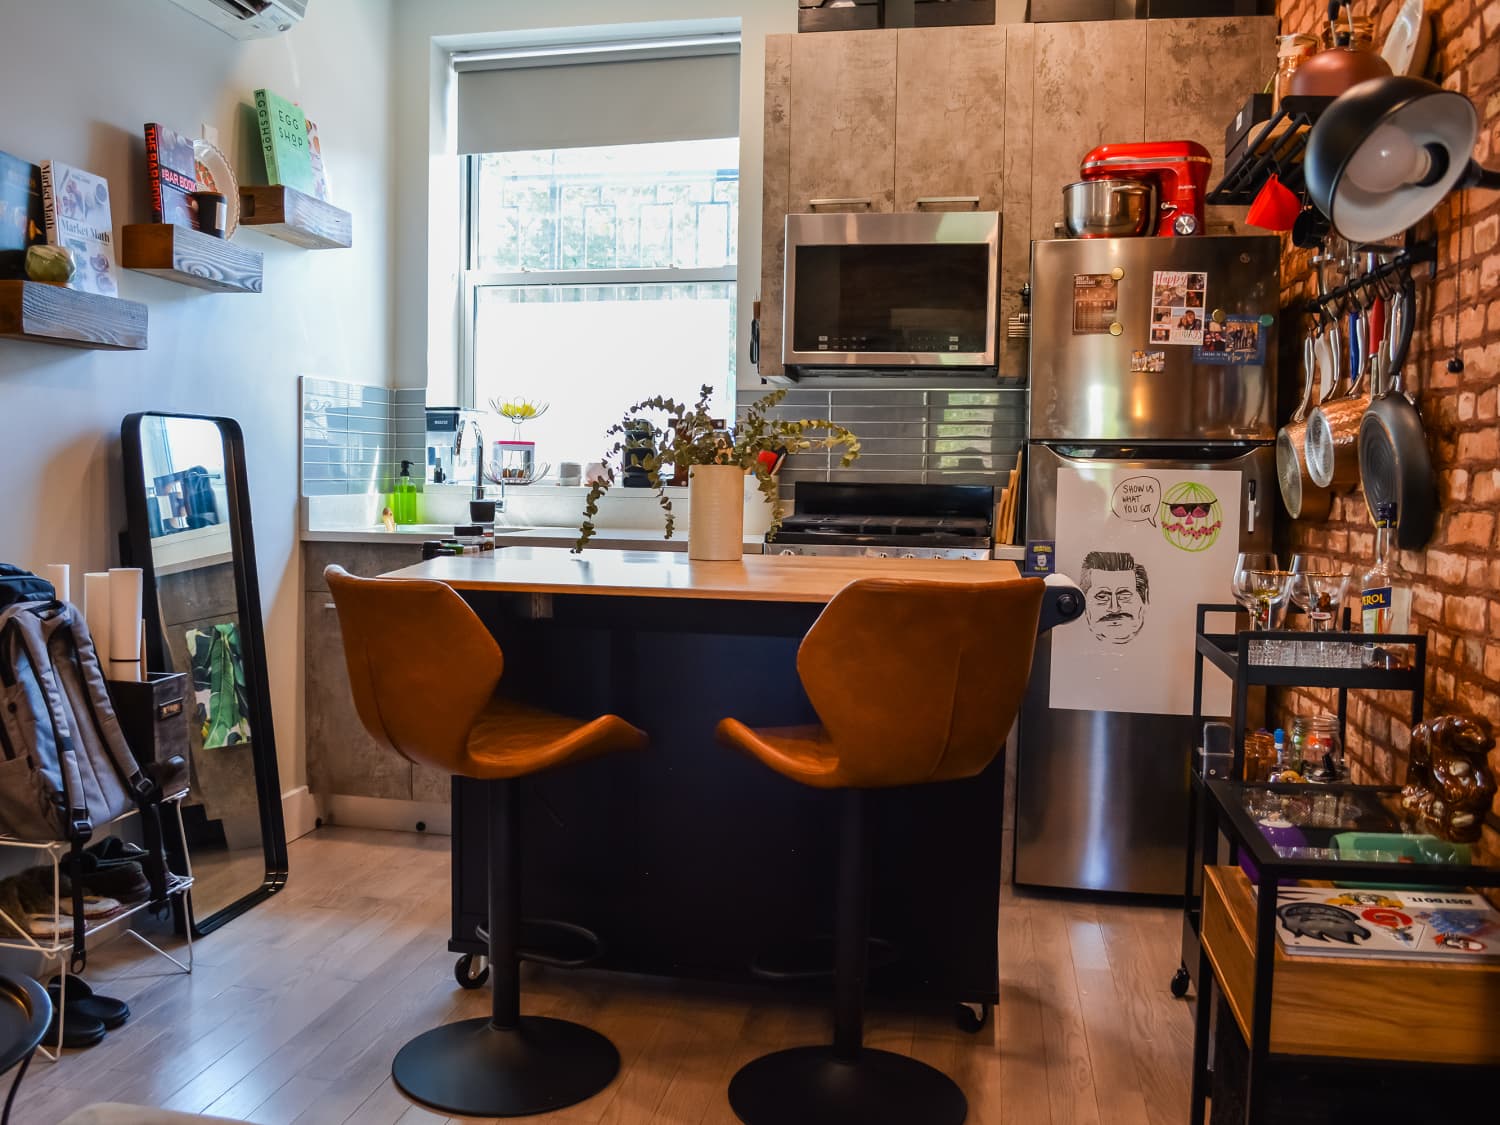 Small Kitchen Ideas To Steal (For Renter And Renovators) - Emily